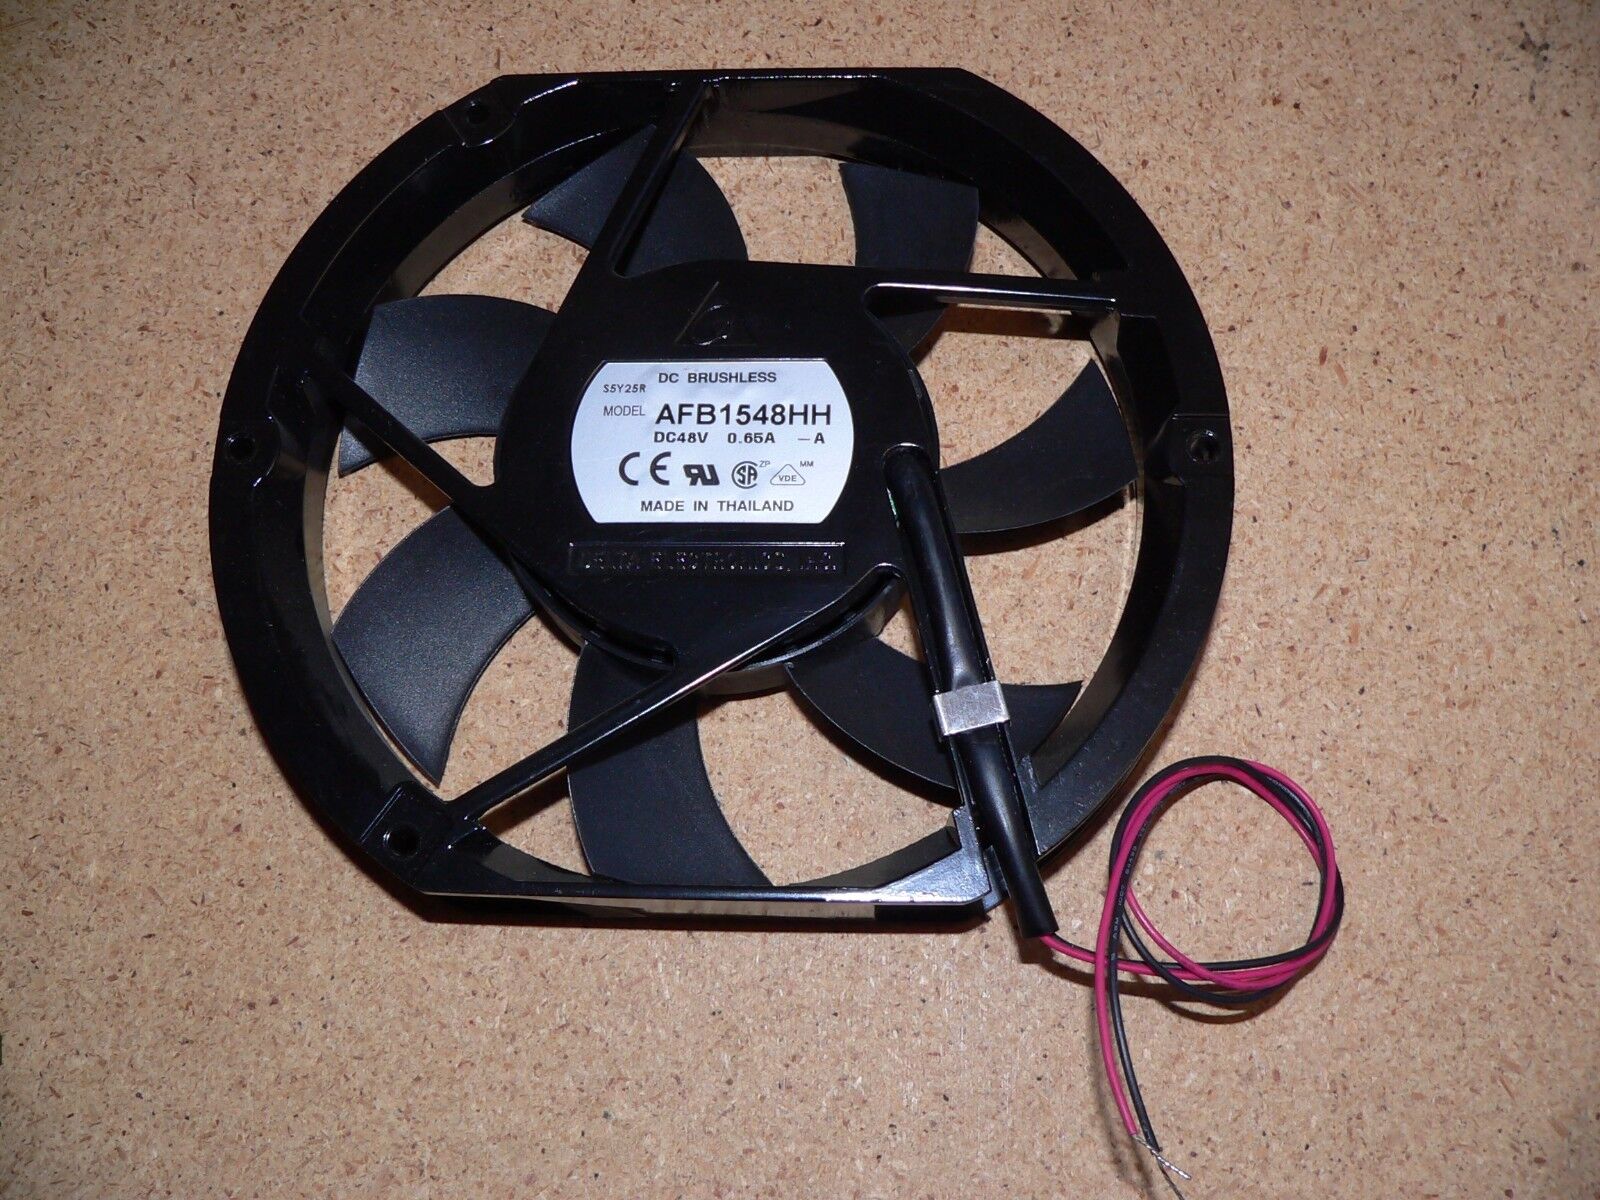 New Delta Electronics AFB1548HH 48VDC 0.65A 150x172x25.4mm 2-Wire Metal case FAN